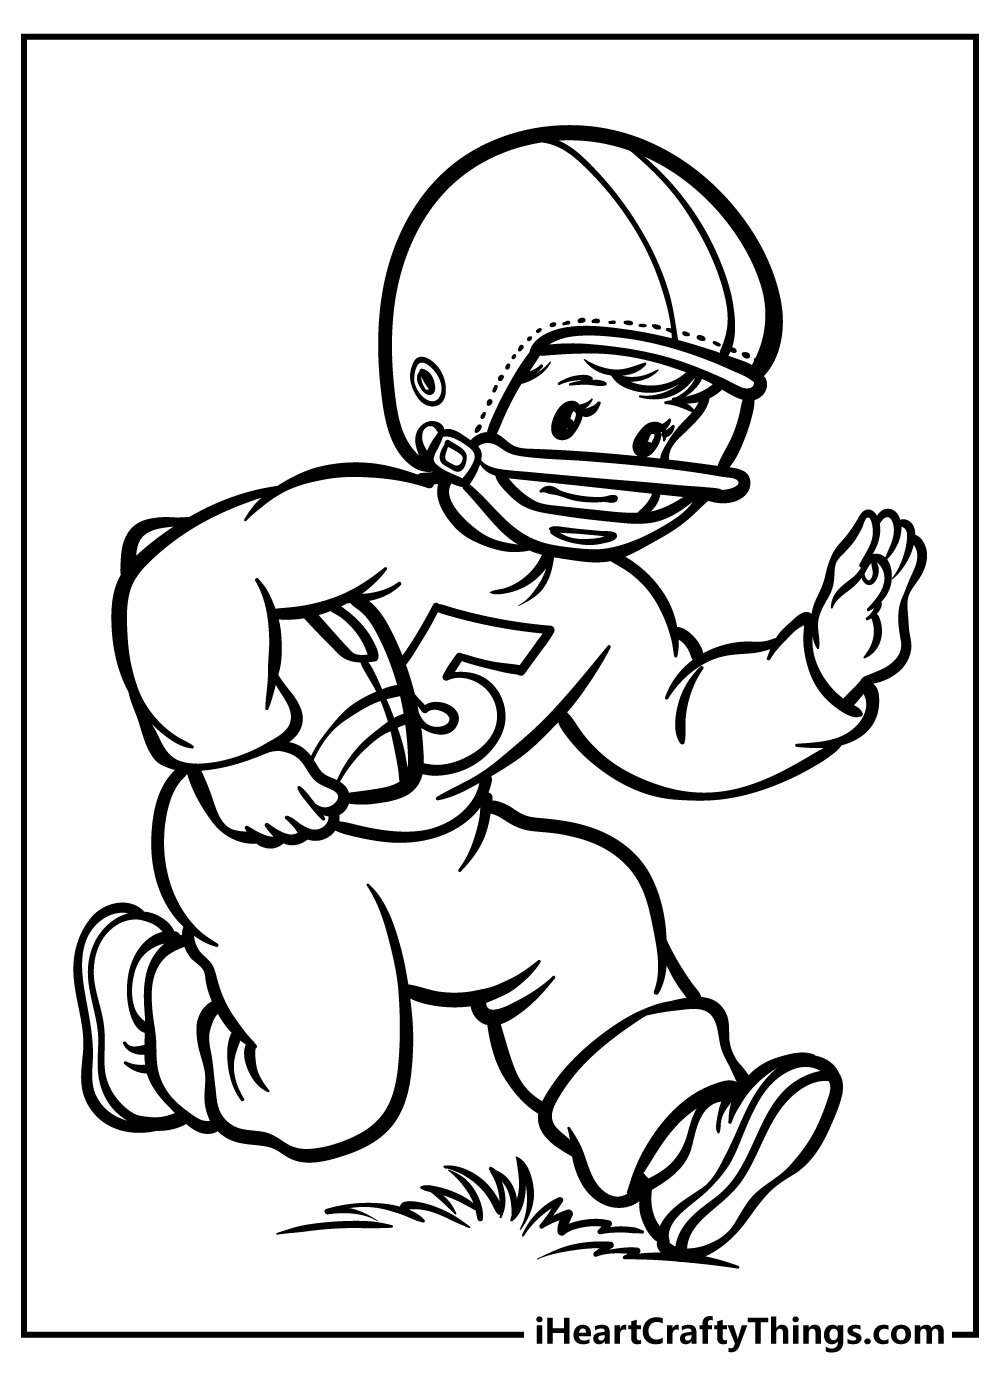 Football Coloring Sheet for children free download